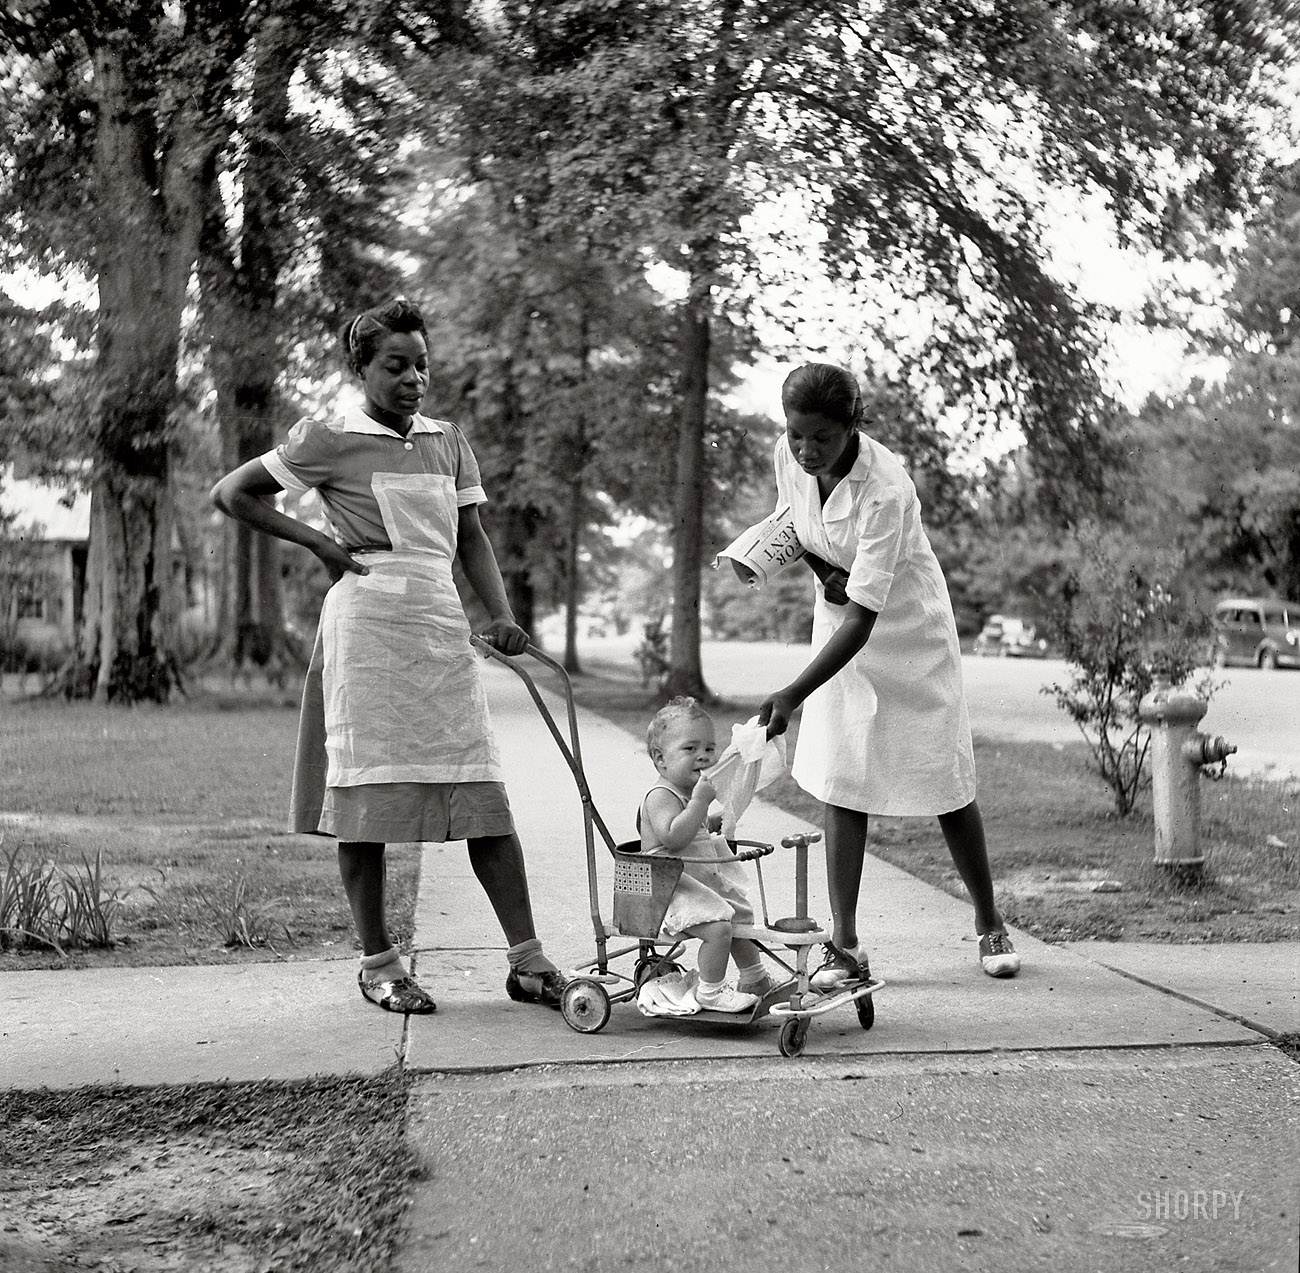 August 1940. "Port Gibson, Mississippi." Medium-format nitrate negative by Marion Post Wolcott for the Farm Security Administration. View full size.